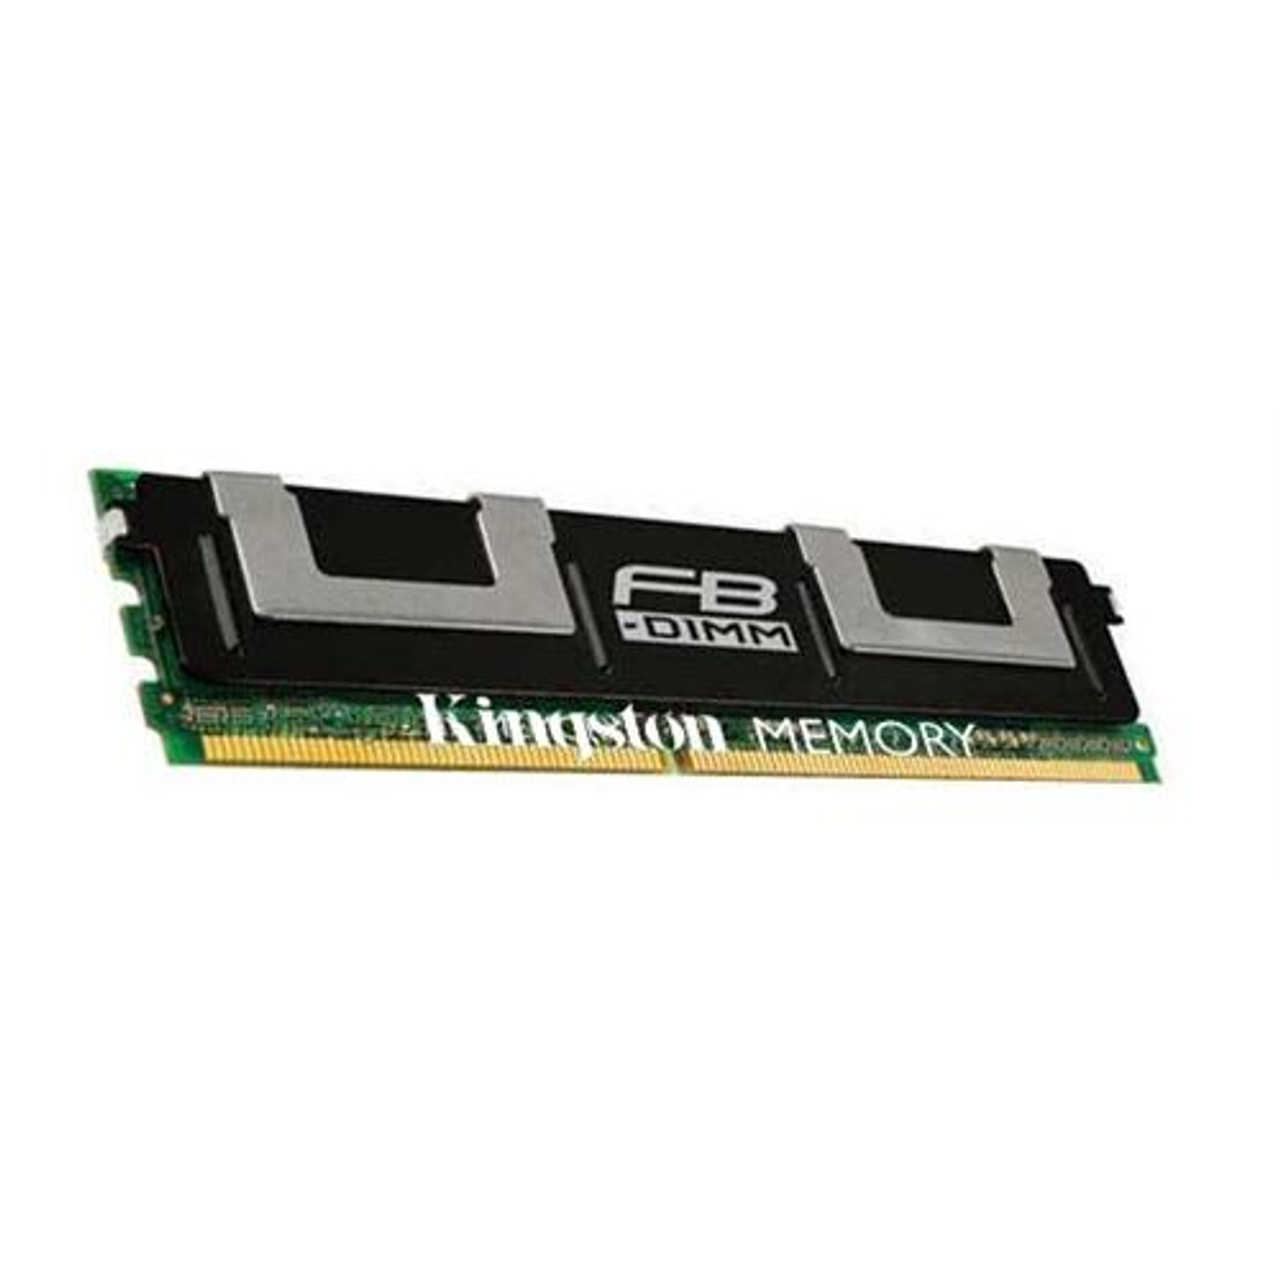 KTL-TSD10K2/16G-G Kingston 16GB Kit (2 X 8GB) PC2-5300 DDR2-667MHz ECC Fully Buffered CL5 240-Pin DIMM Dual Rank Memory for Lenovo ThinkStation D10 6427 6493 TAA